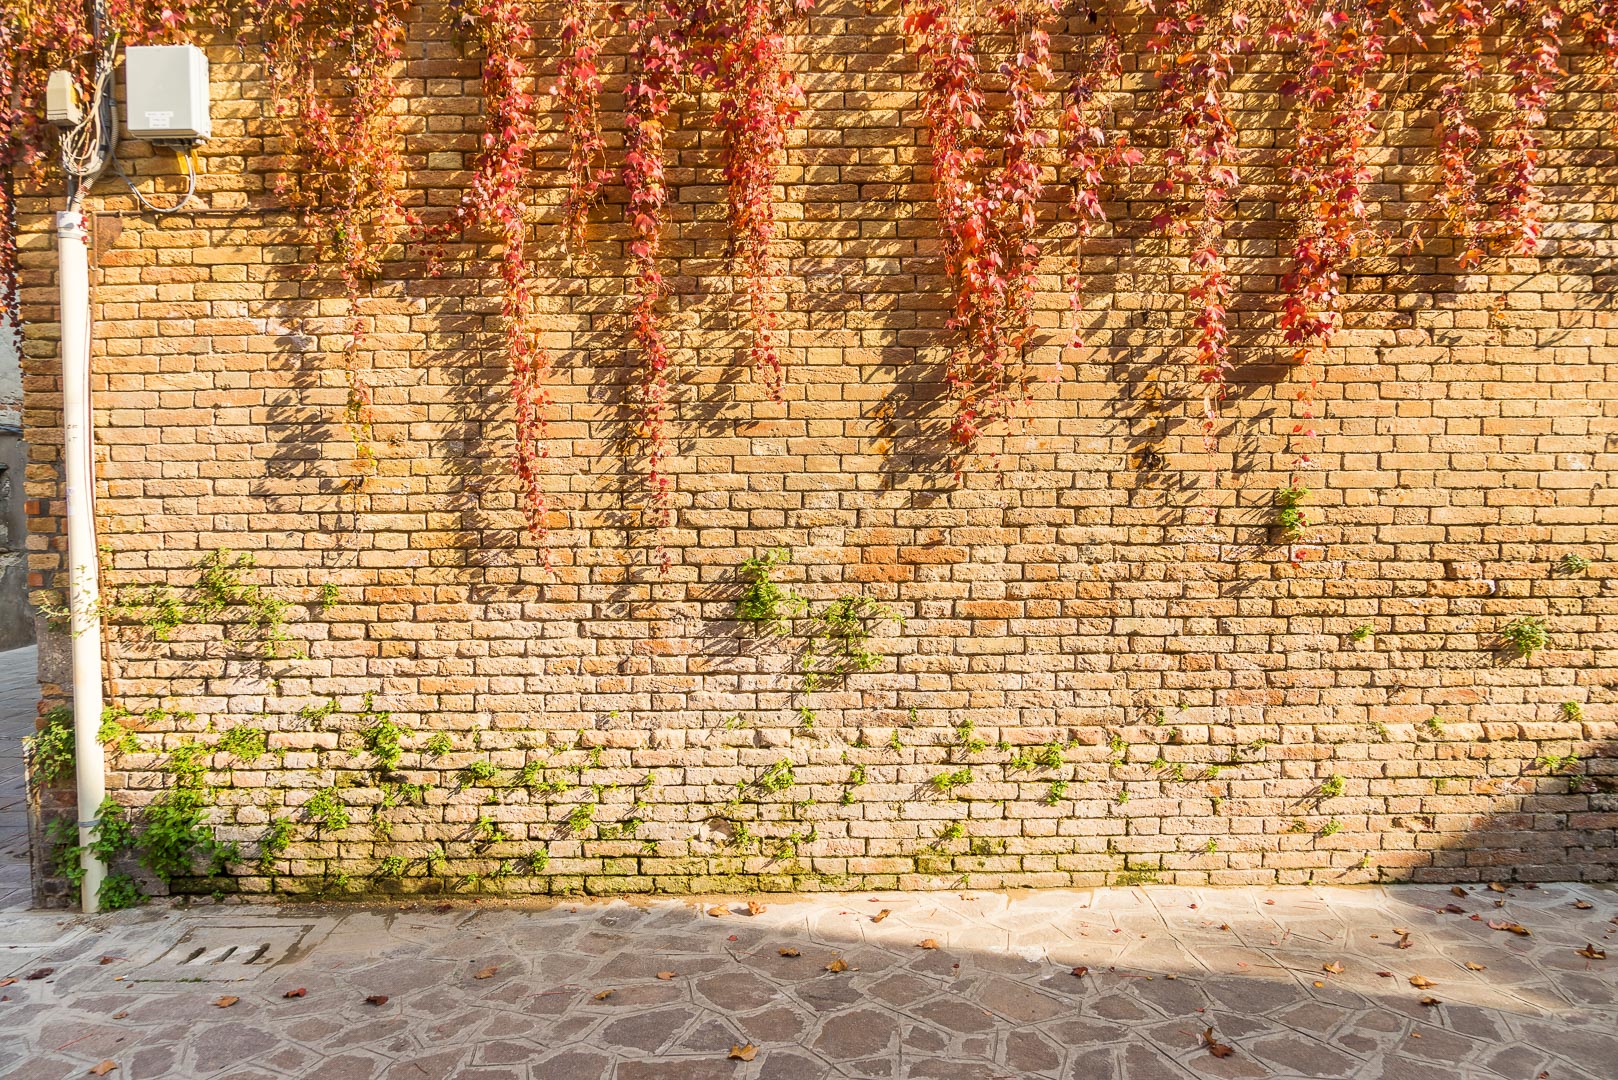 Backplate • ID: 13744 • HDRI Haven - Street With Brick Wall Covered With Leaves